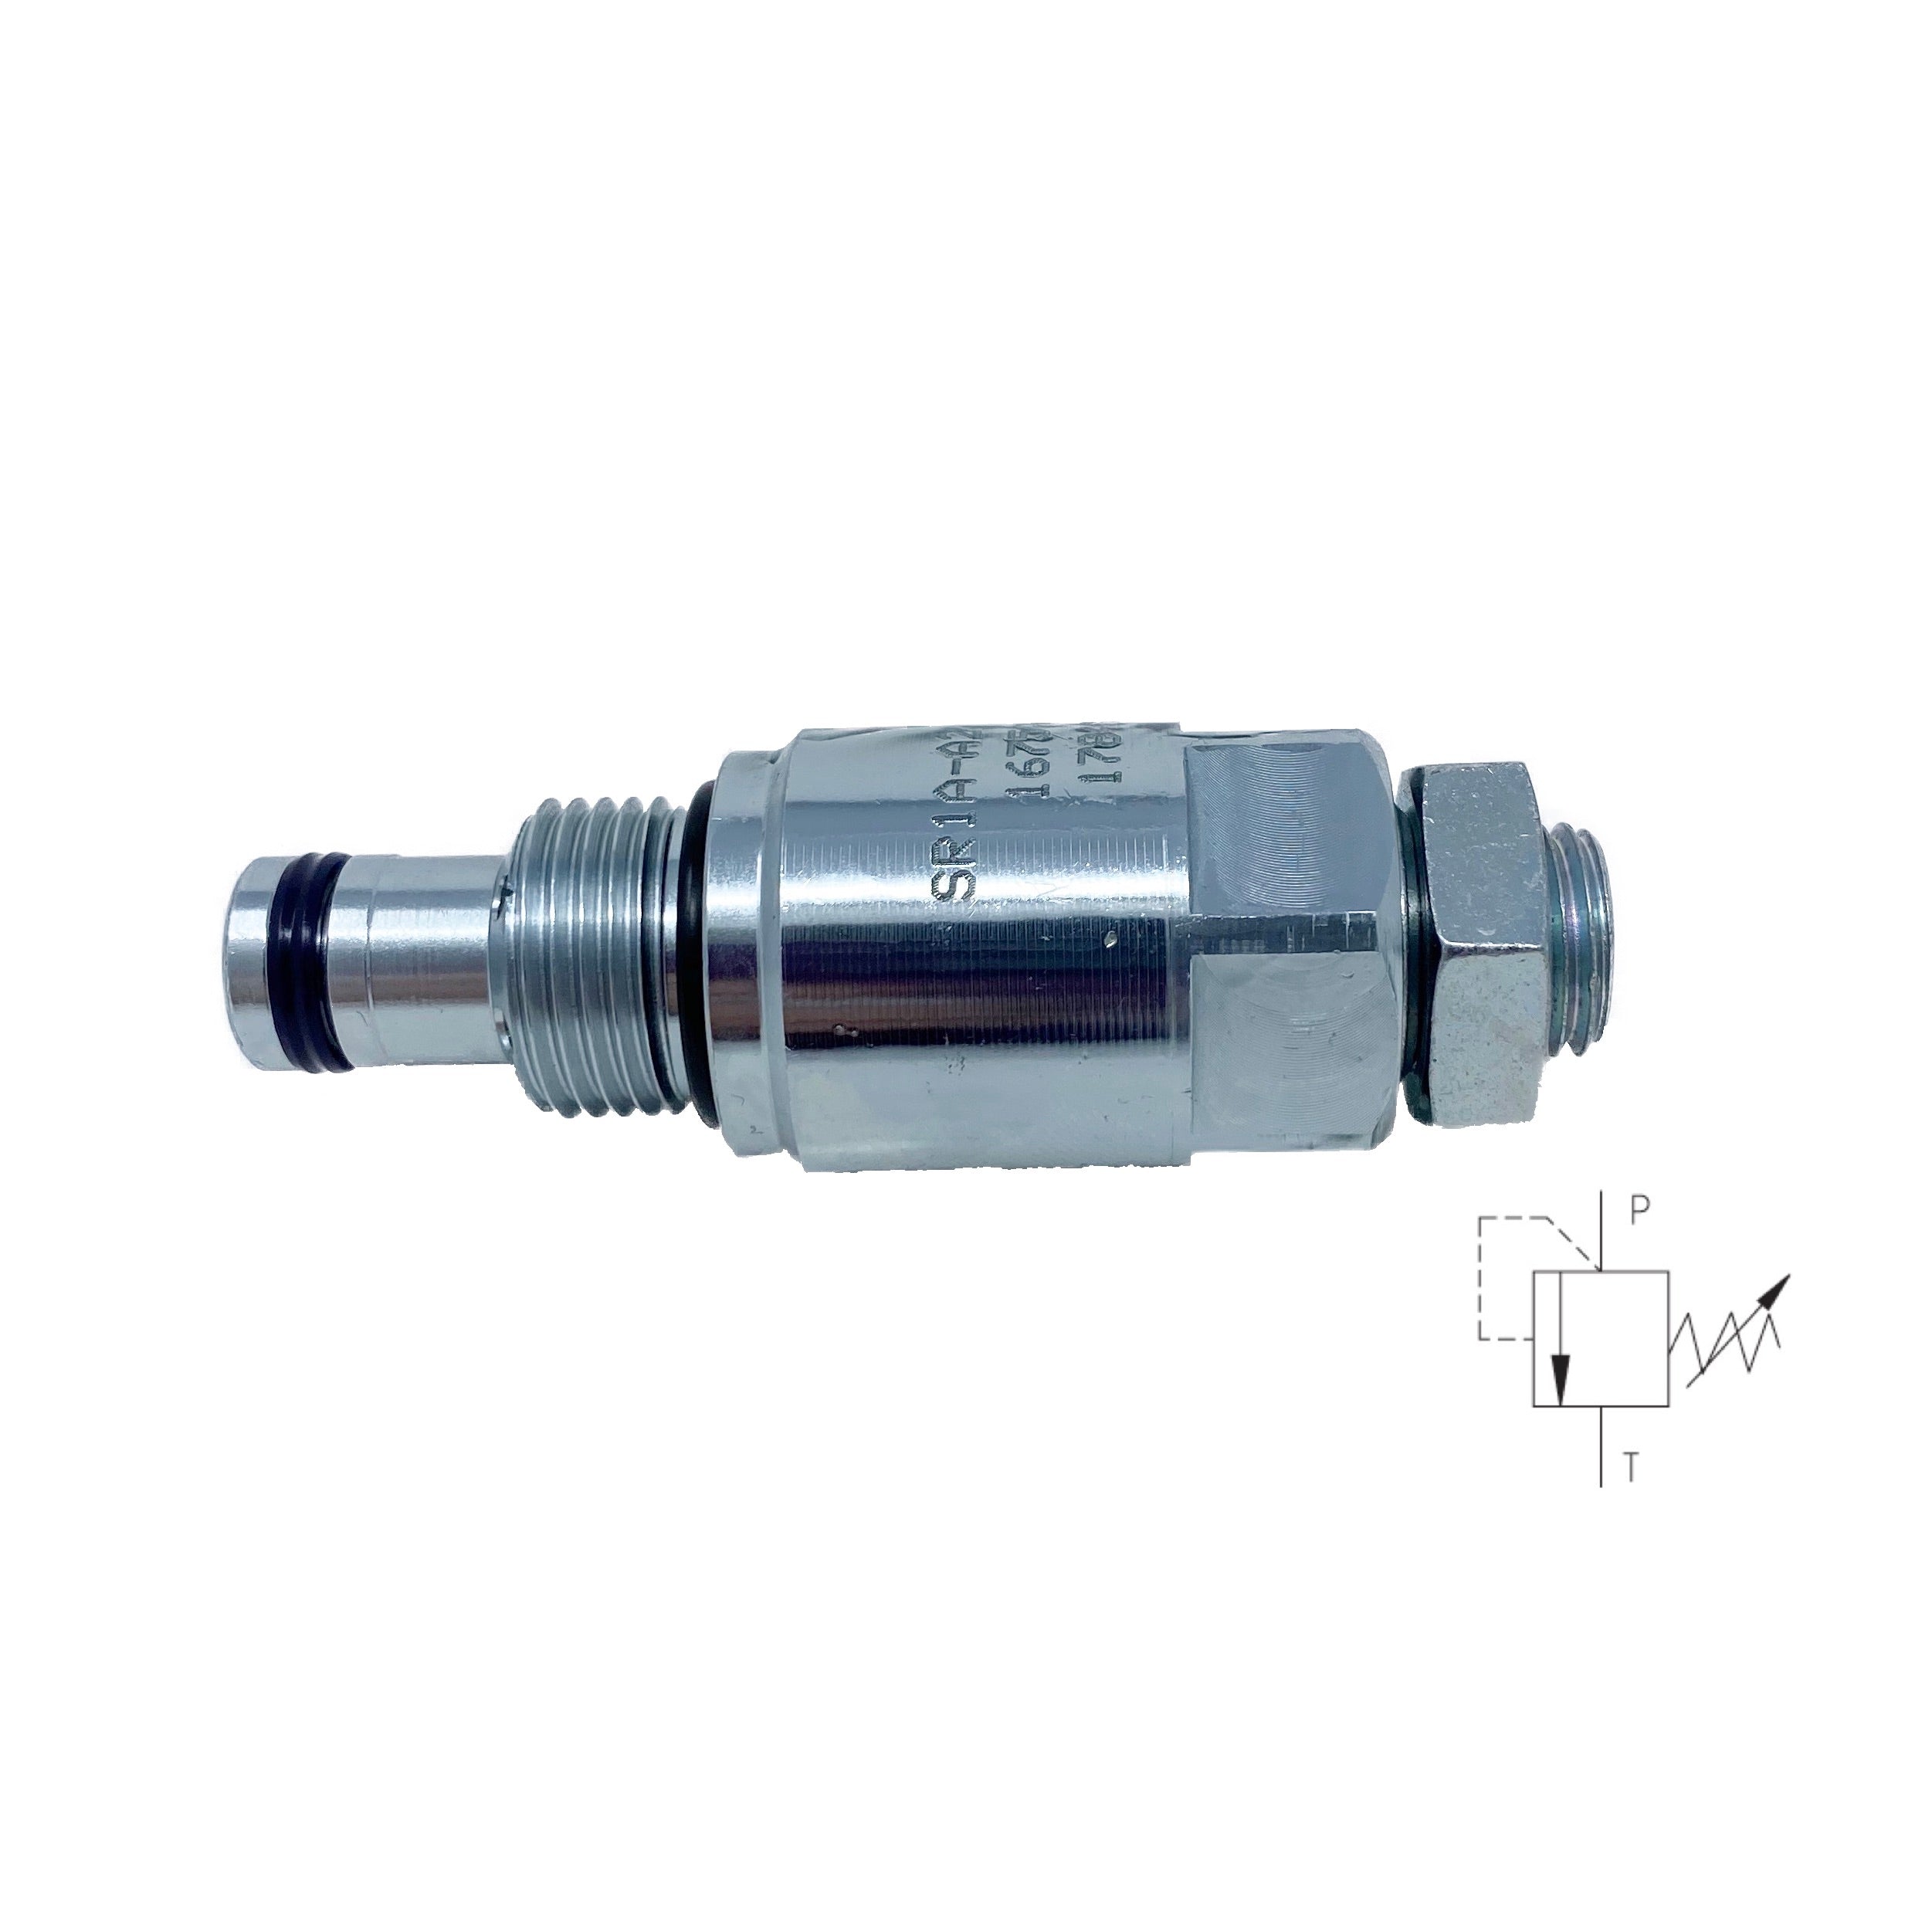 SR1A-A2/L6S-A : Argo Relief, Poppet Type, Direct Acting, 8 GPM, 5100psi, Allen Key, Range to 914psi, C-8-2 Cavity